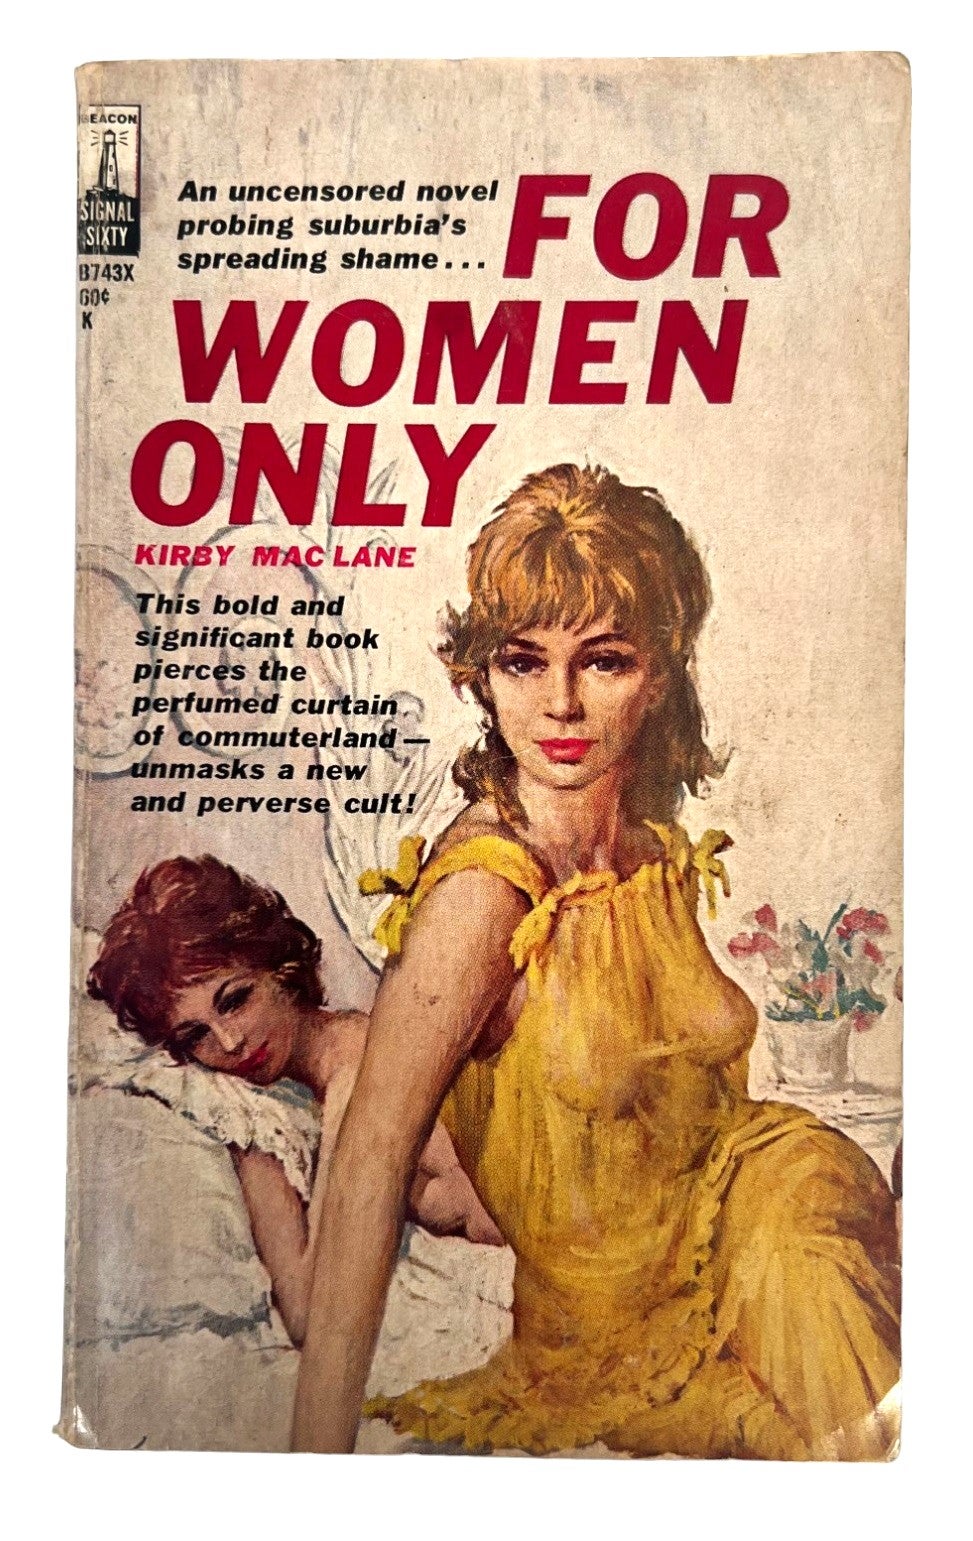 Early Lesbian Pulp Novel For Women Only by Kirby MacLane